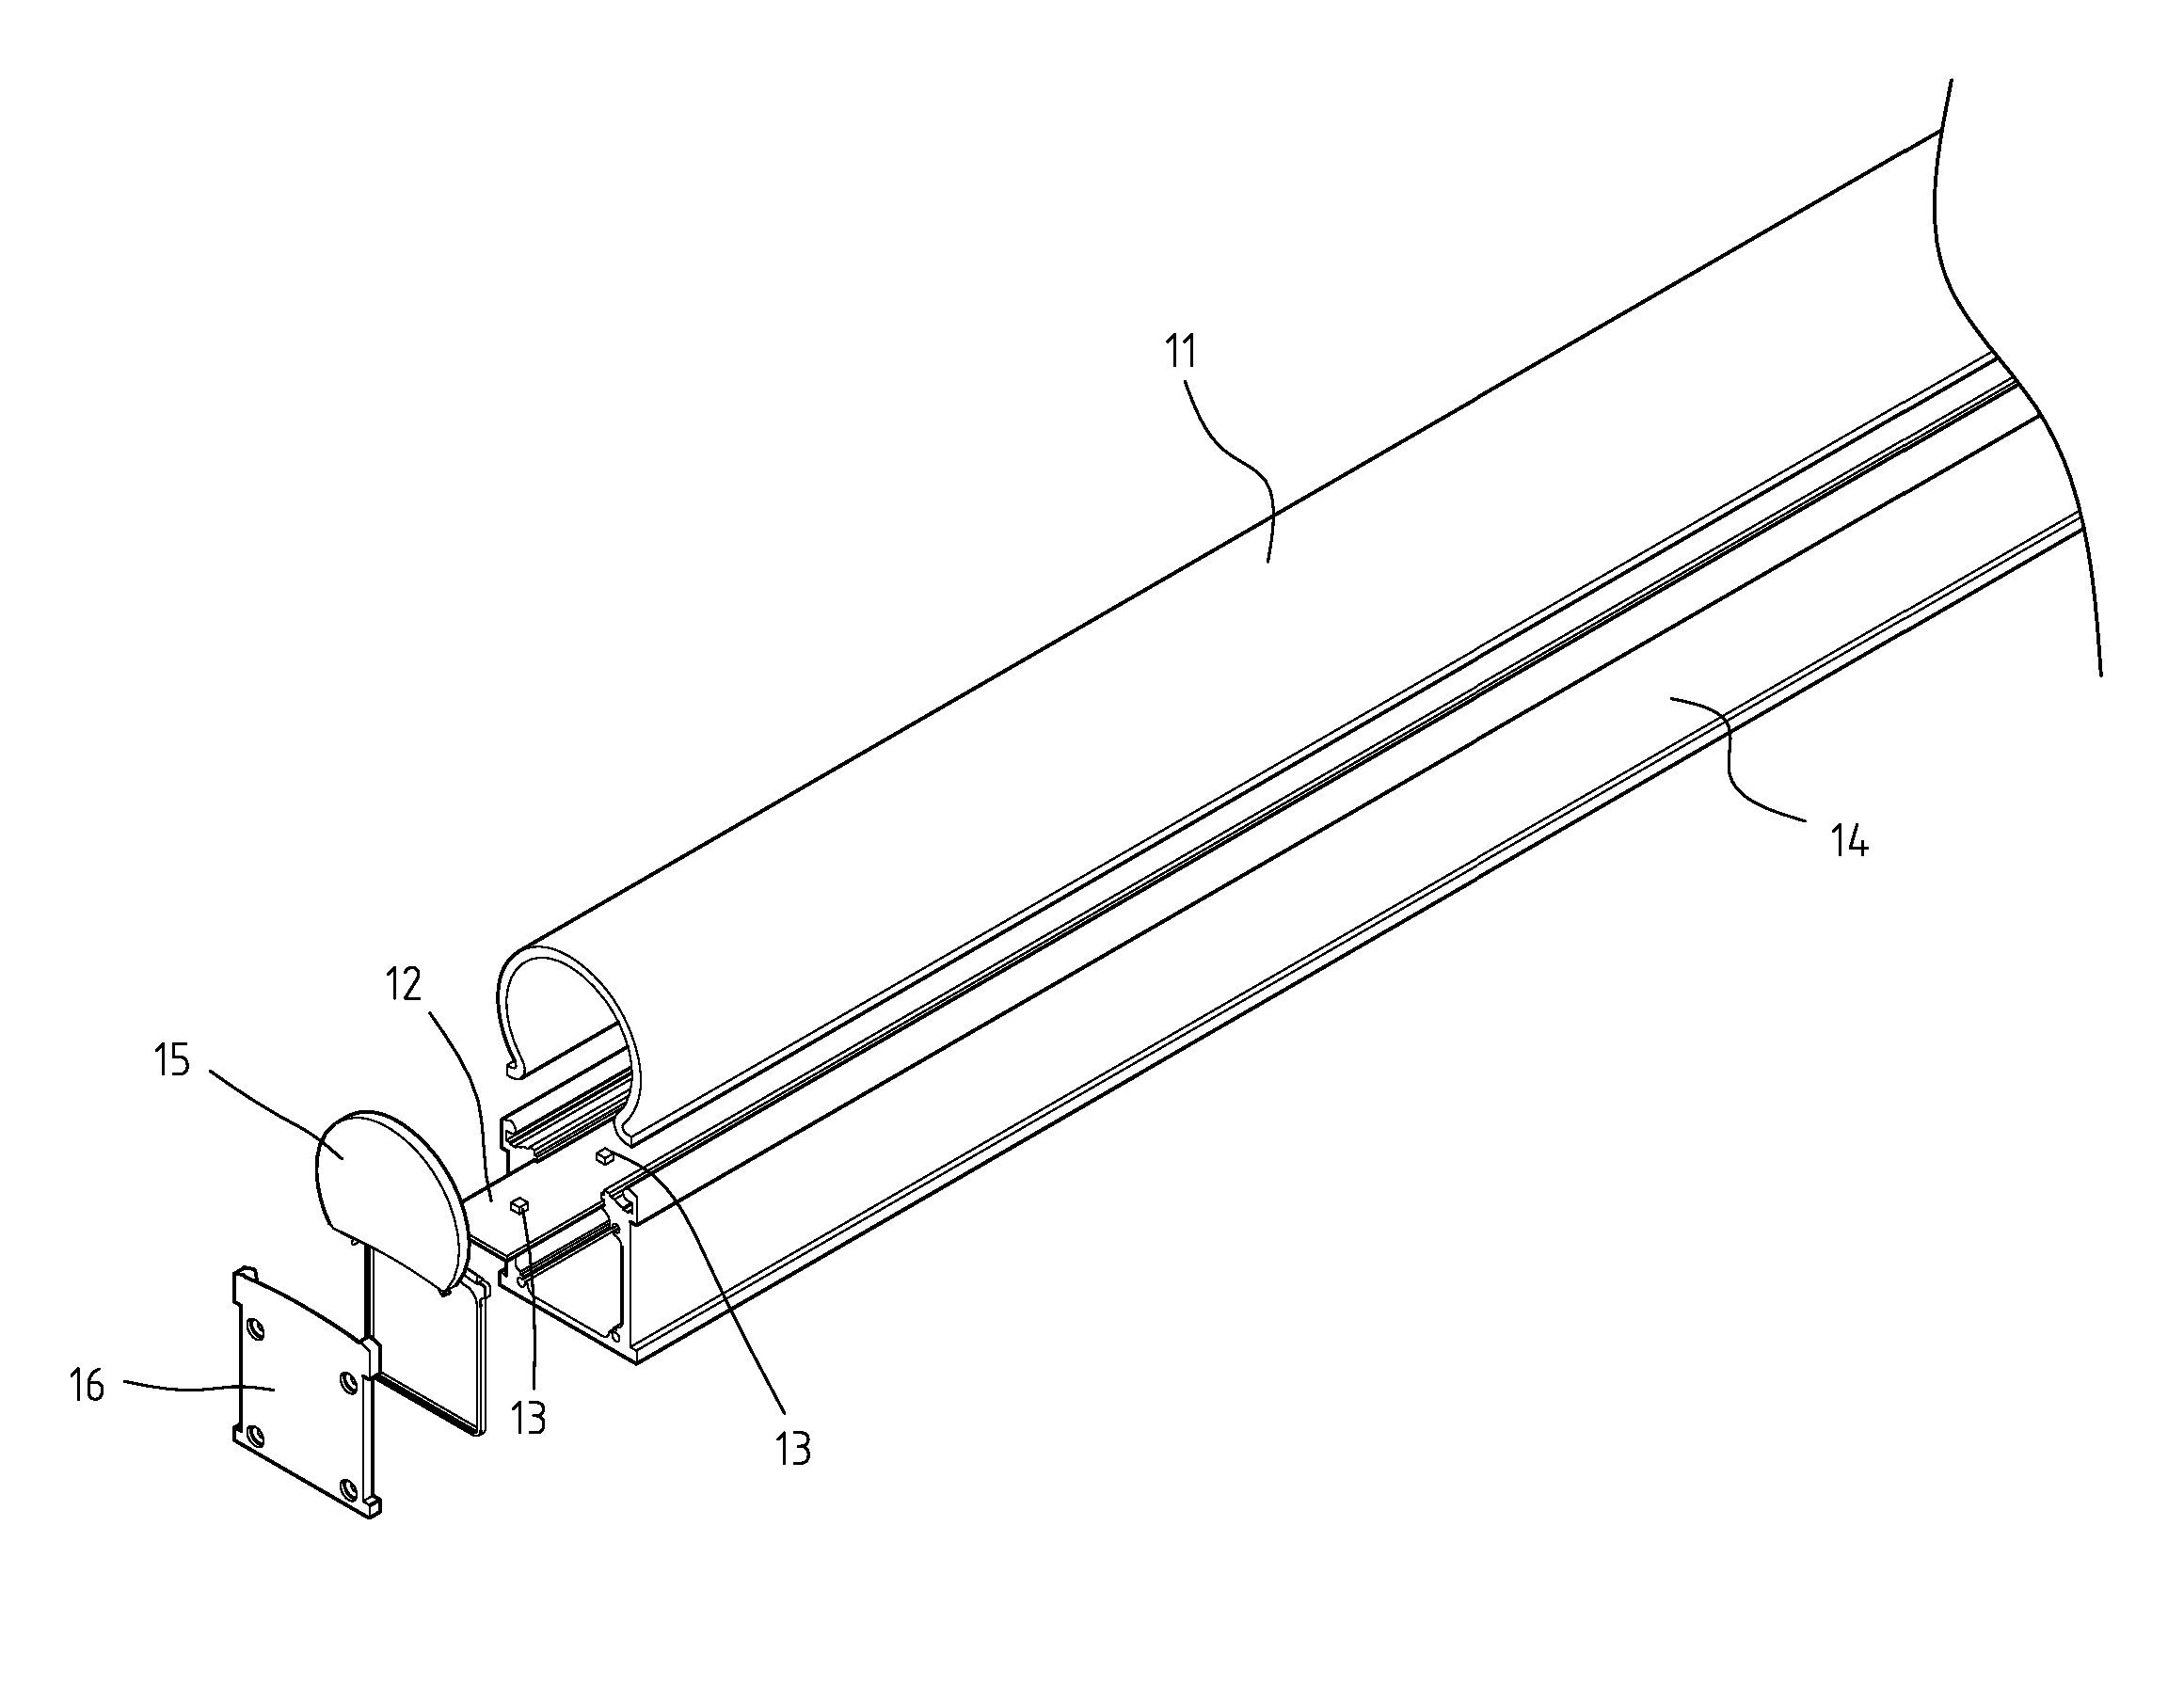 Structure For A High Efficiency And Water-Proof Lighting Device